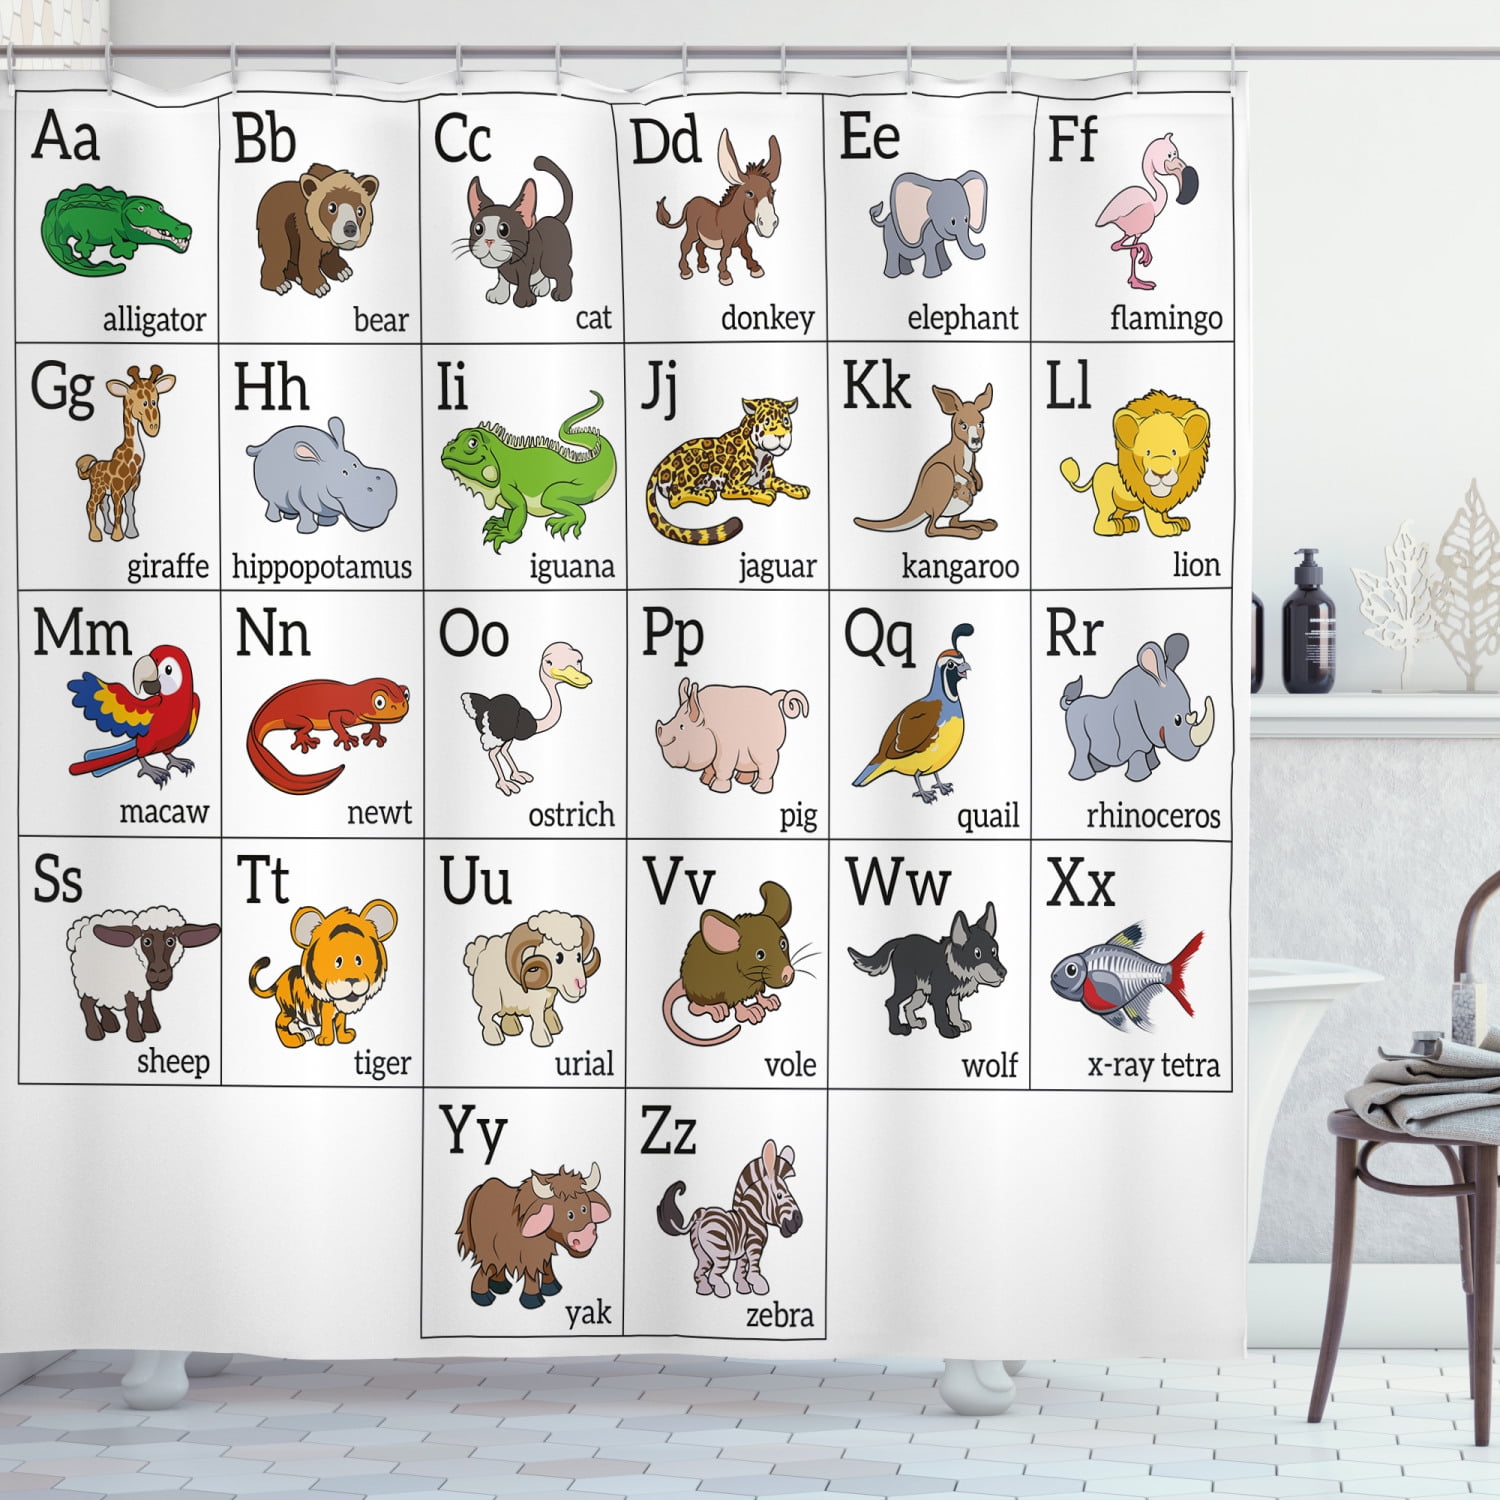 Educational Shower Curtain, Alphabet Learning Chart with Cartoon Animals  Names Letters Upper and Lowercase, Fabric Bathroom Set with Hooks, 69W X  70L Inches, Multicolor, by Ambesonne 